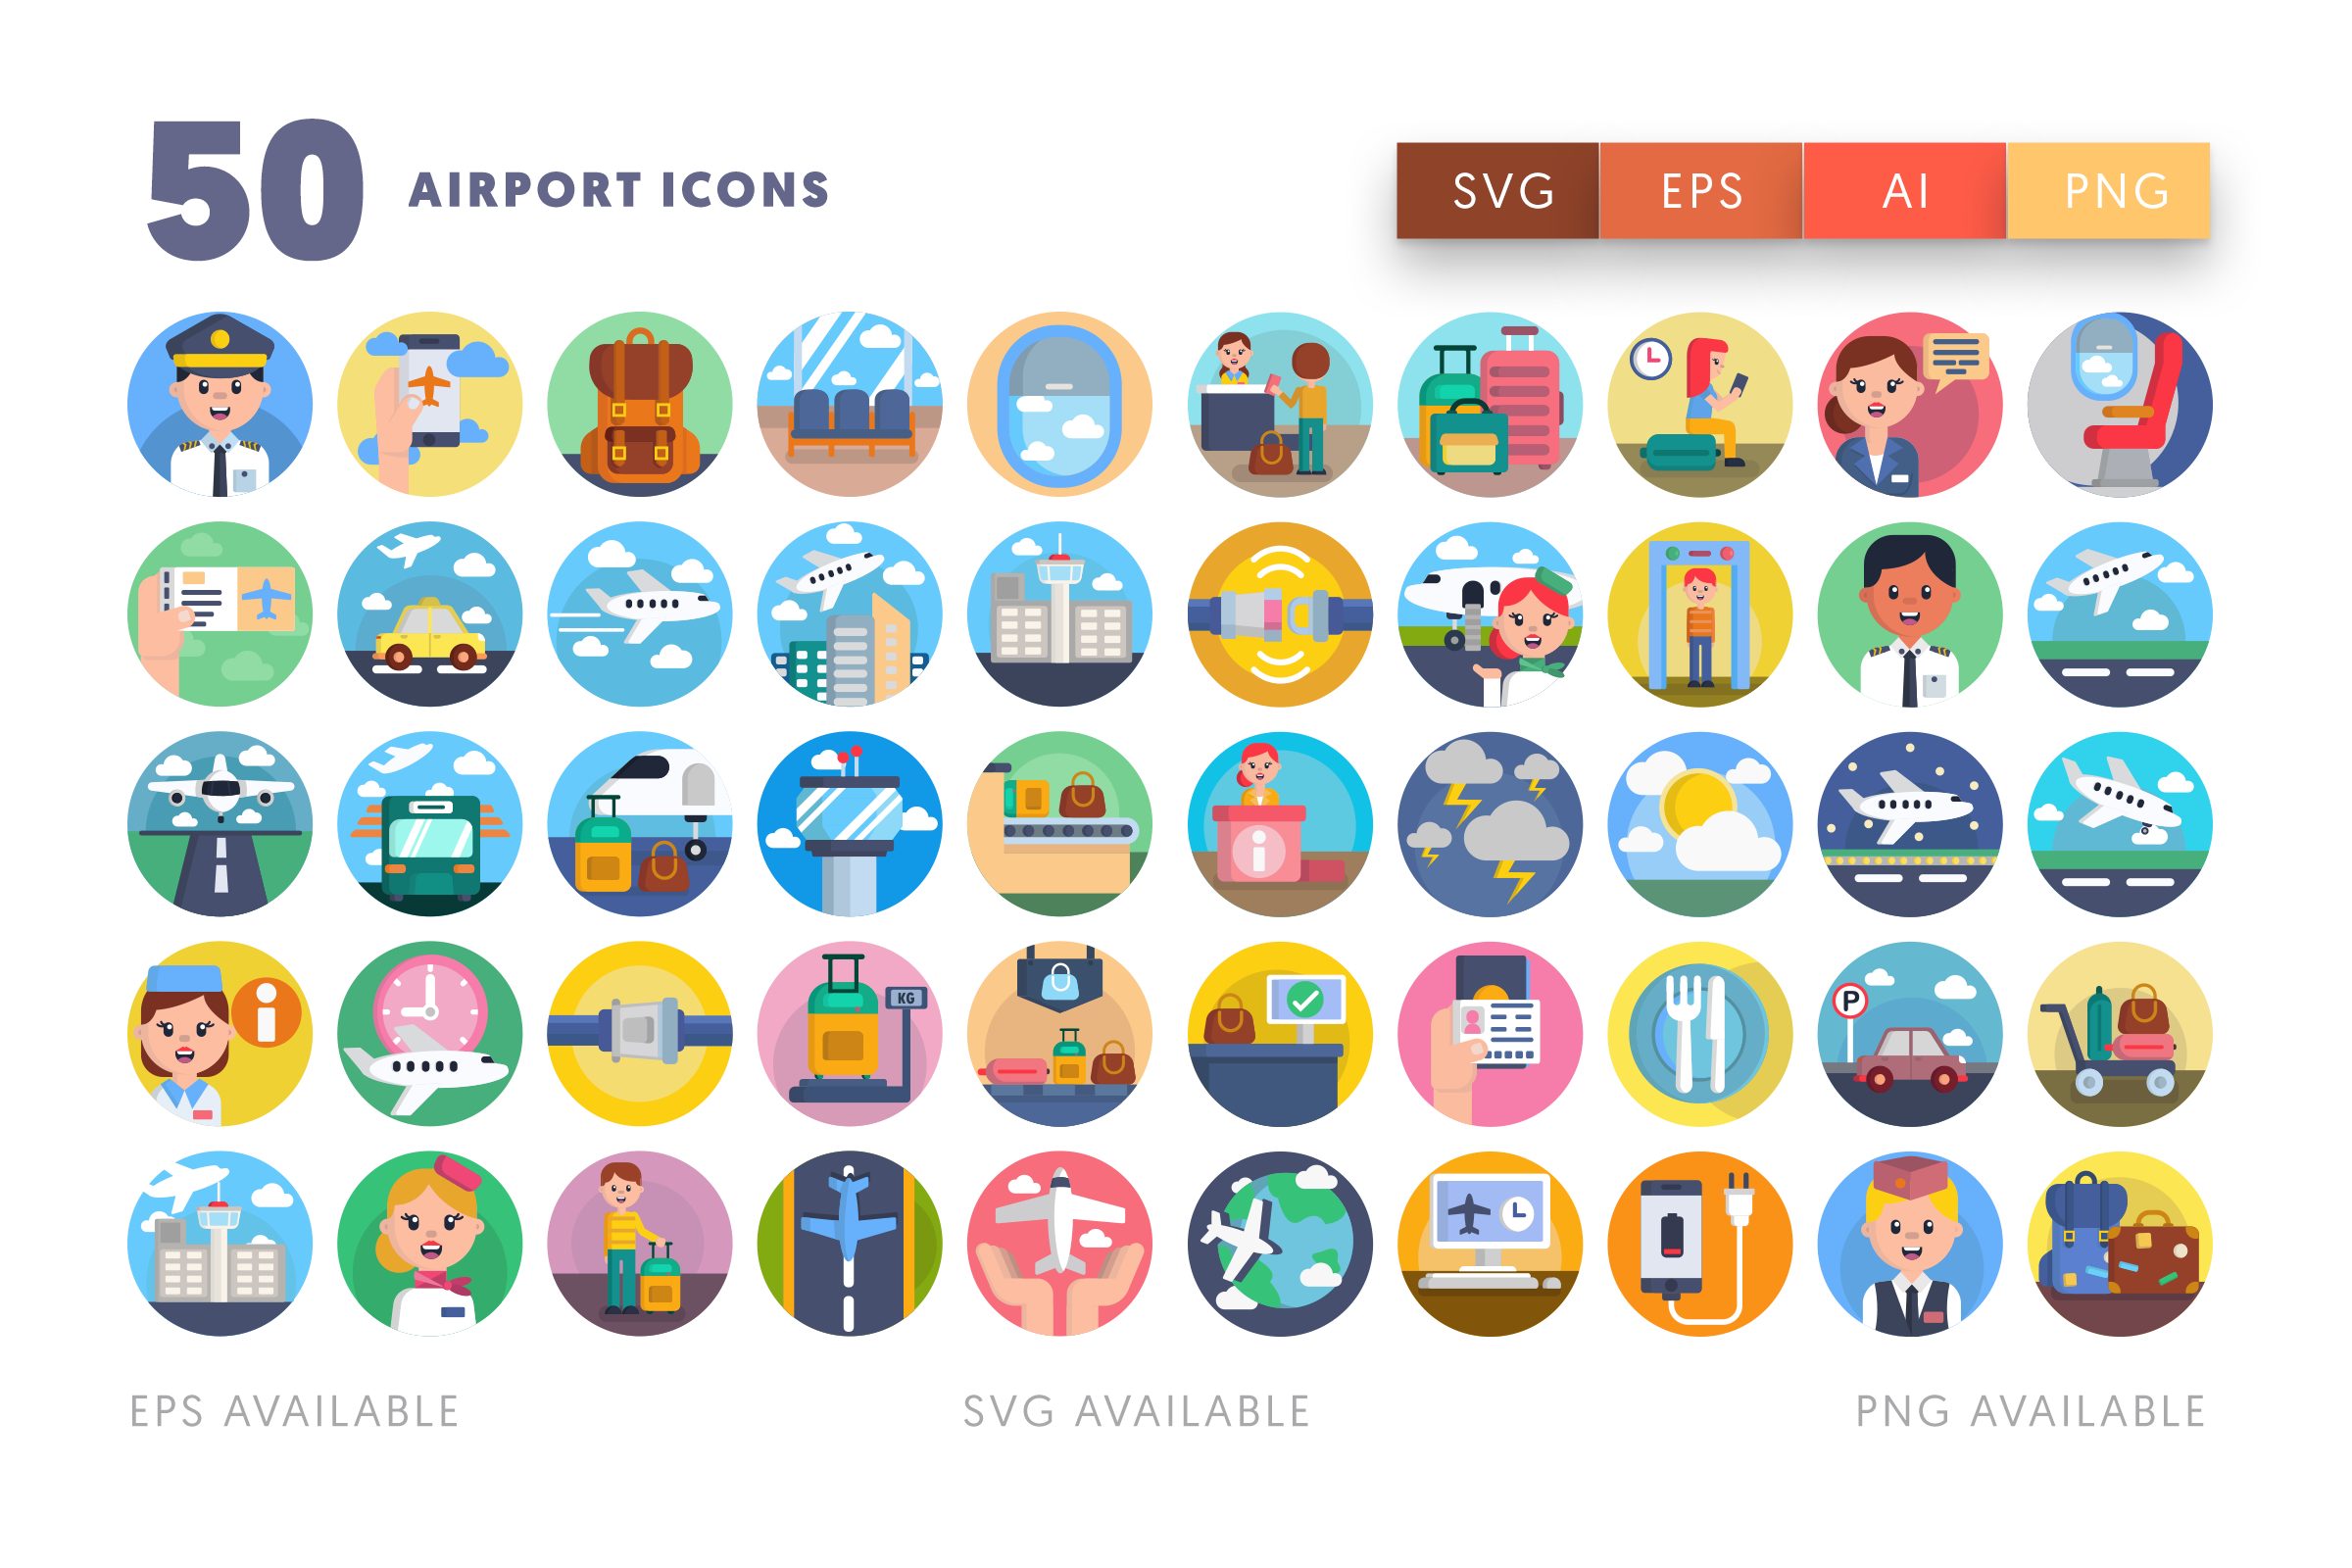 Airport icons png/svg/eps